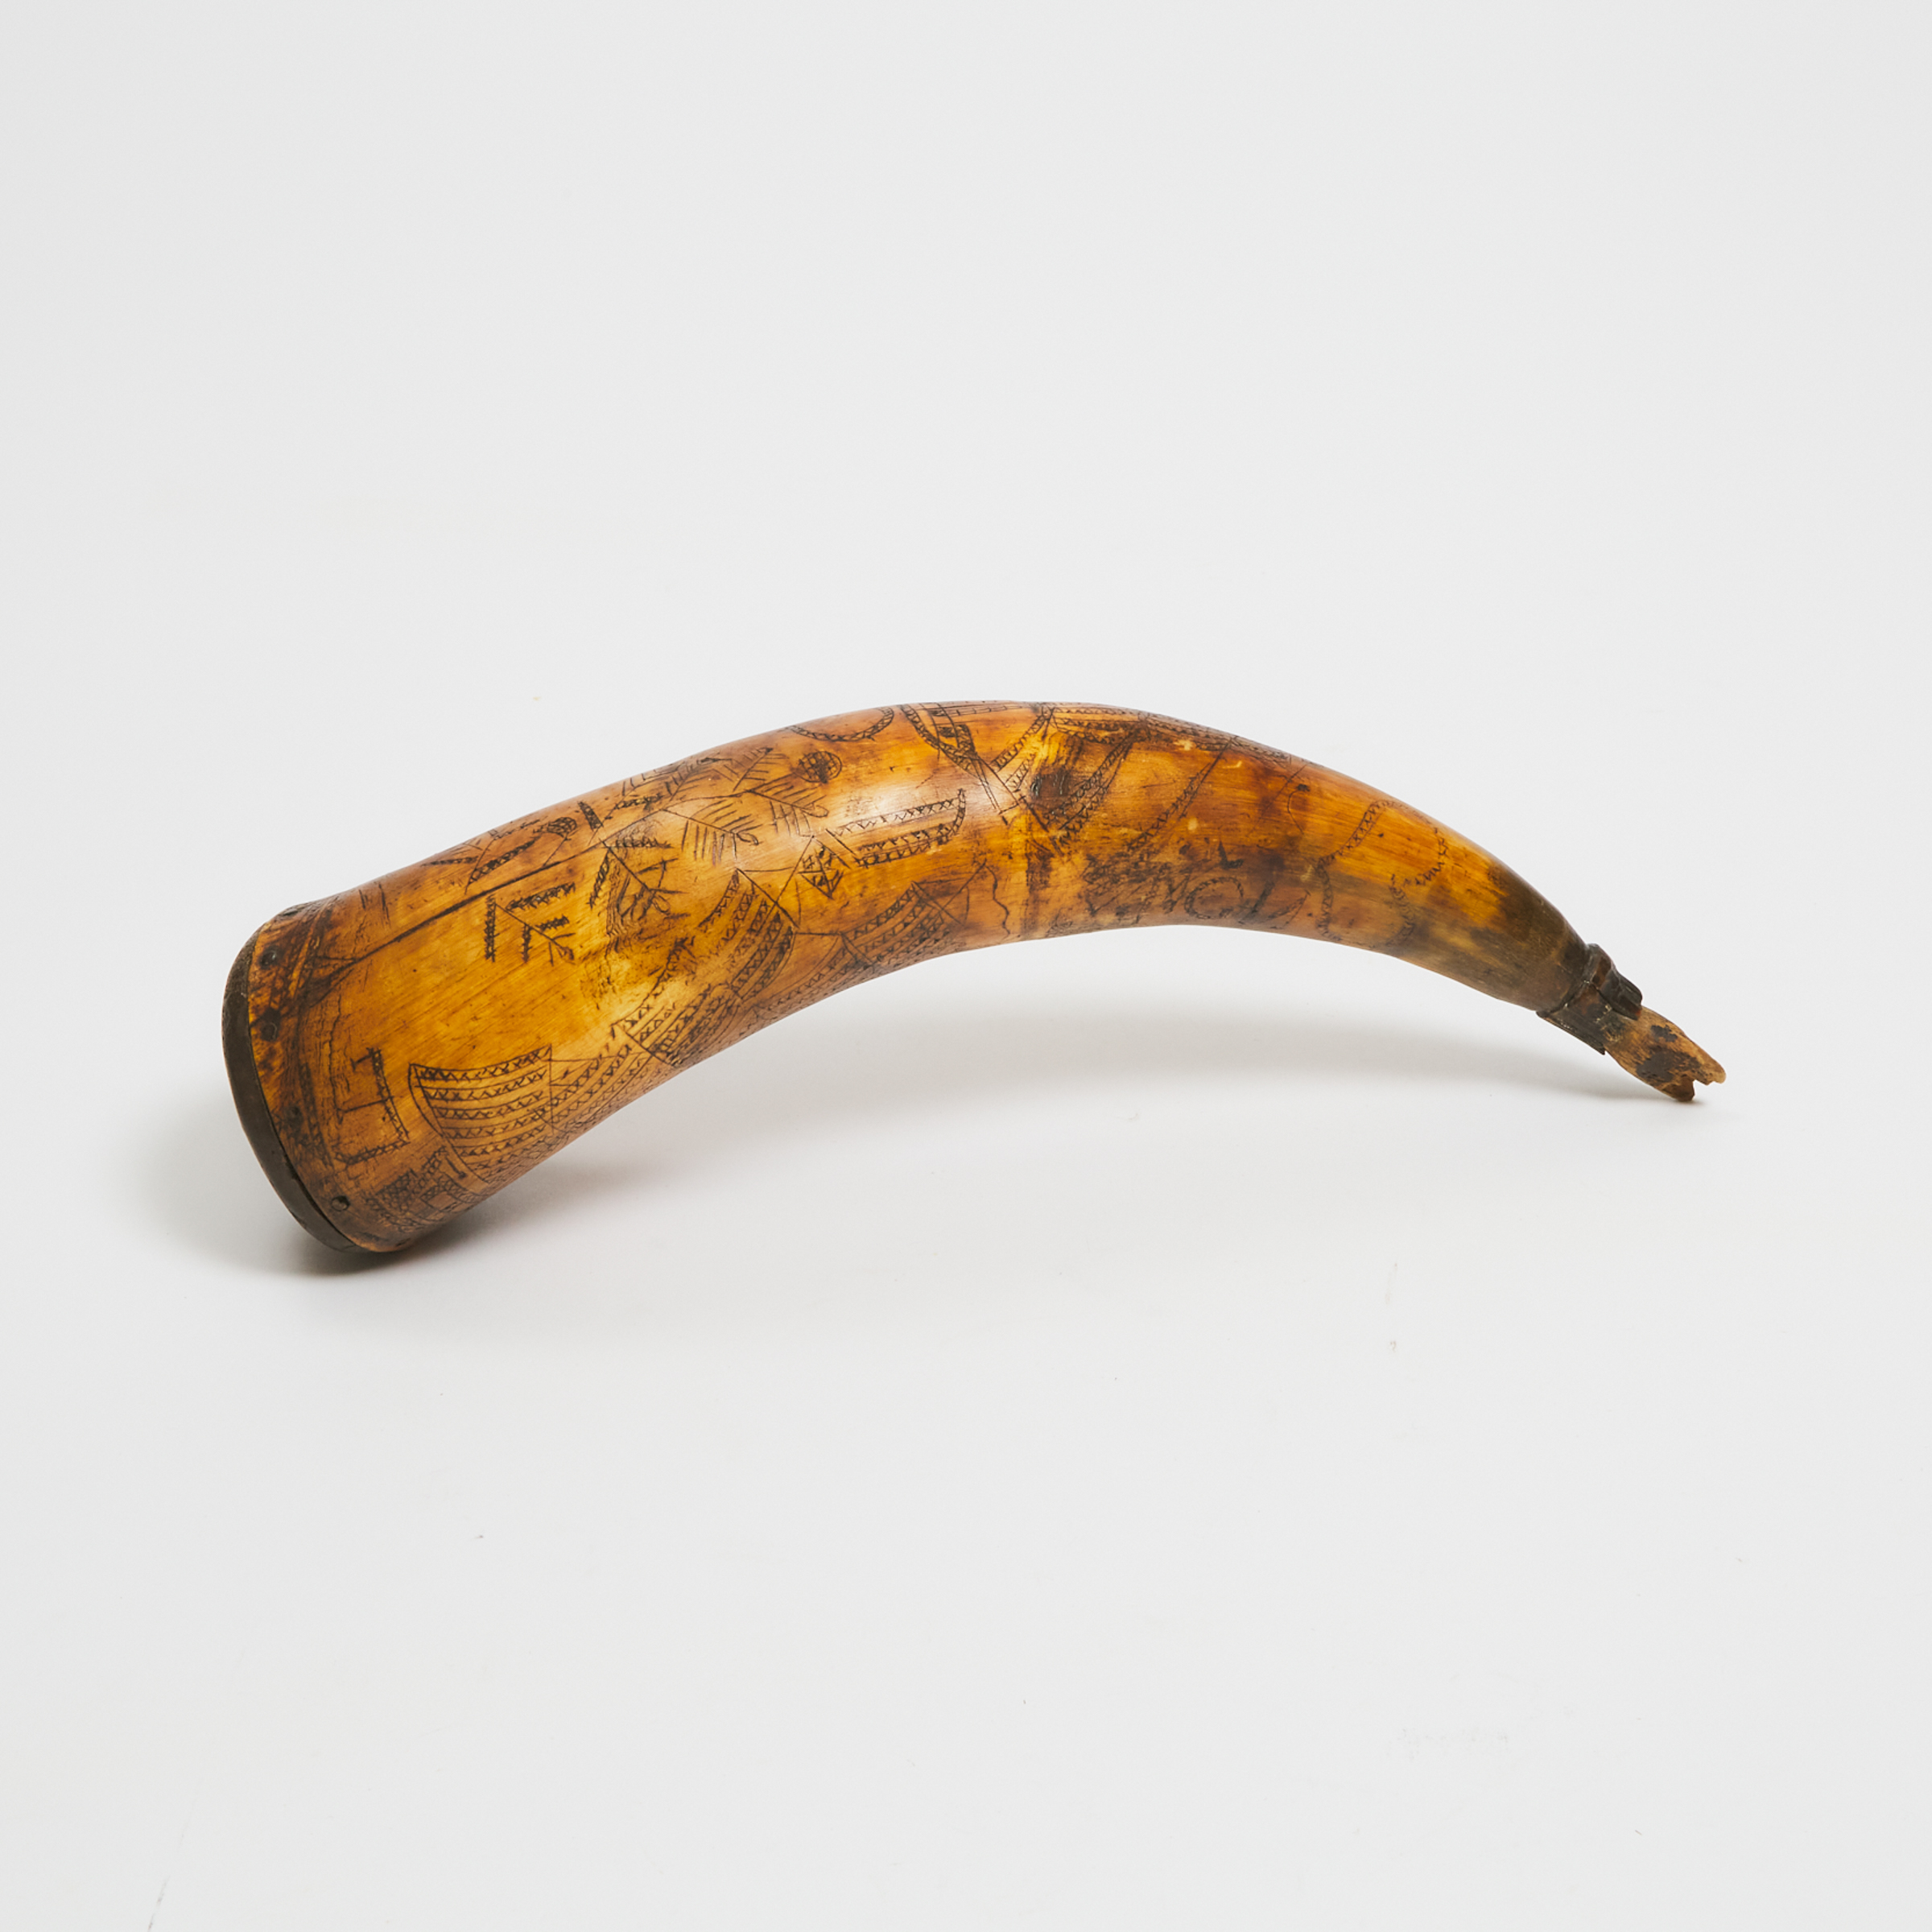 French and Indian (Seven Years) War Powder Horn, mid 18th century